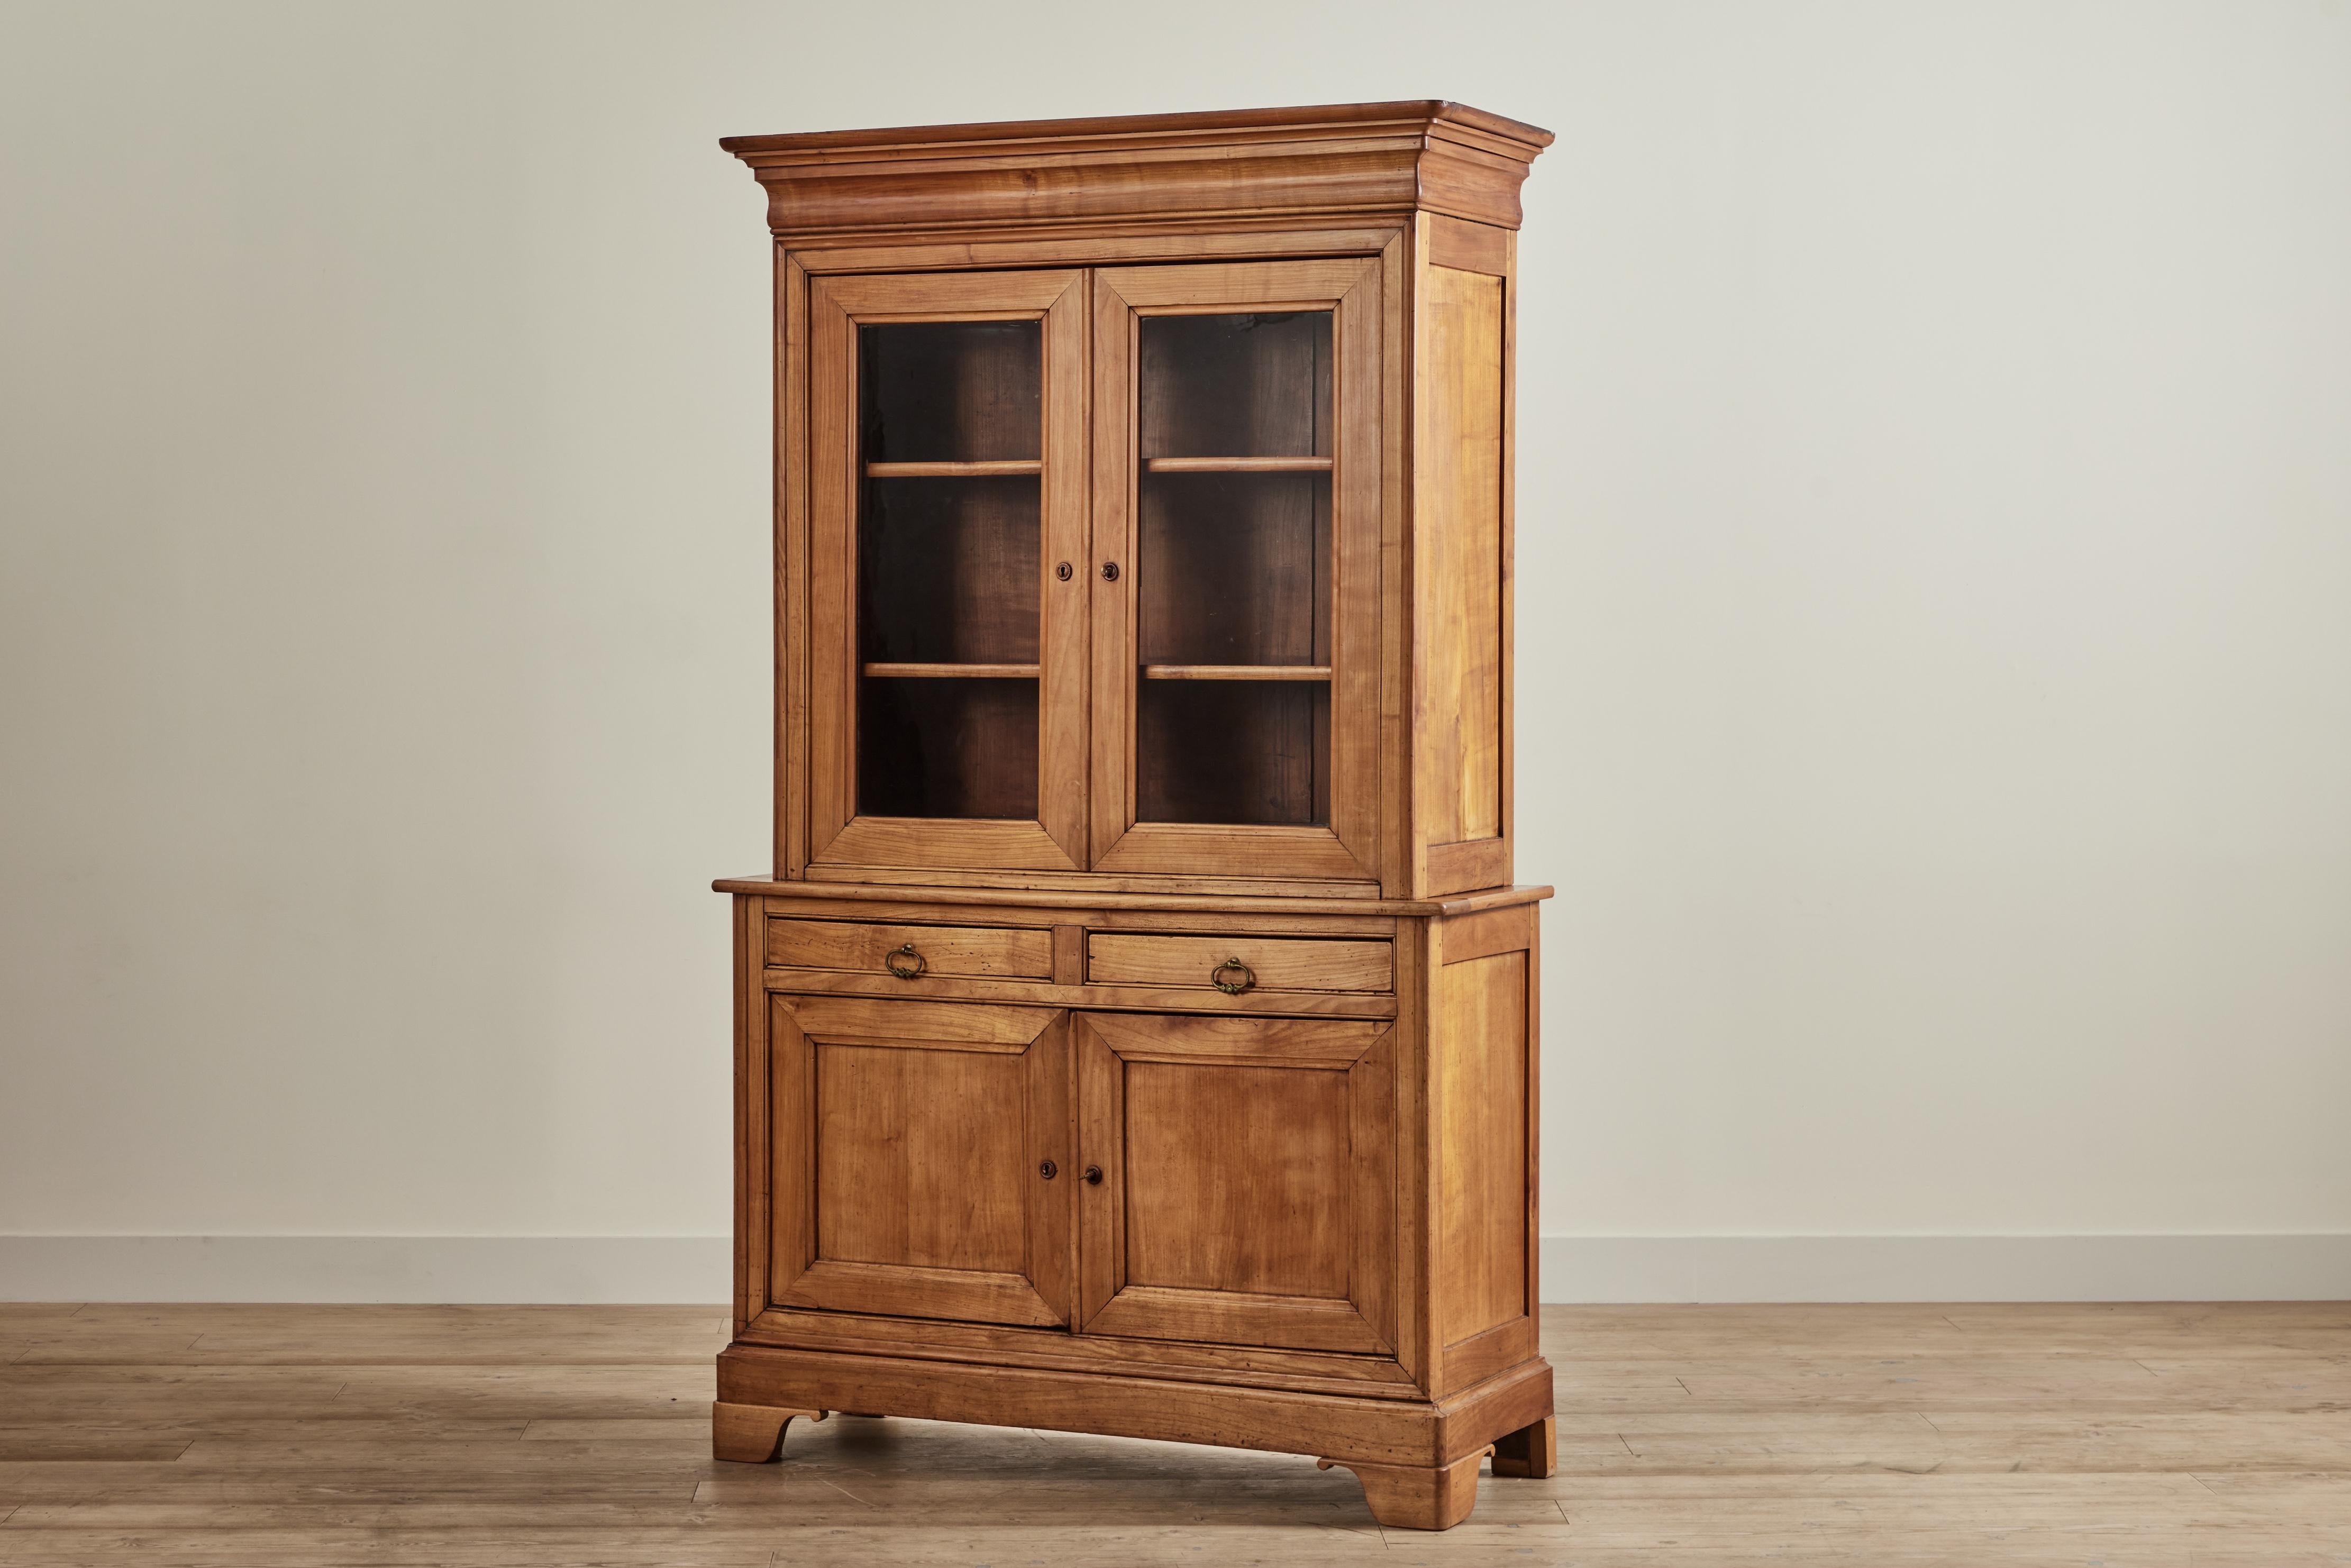 Nineteenth century Louis Philippe tall buffet cabinet from France with upper glass door cupboard, two central drawers, and two lower cupboards. Cabinet comes with a key and is in good vintage condition with wear that is consistent with age and use.